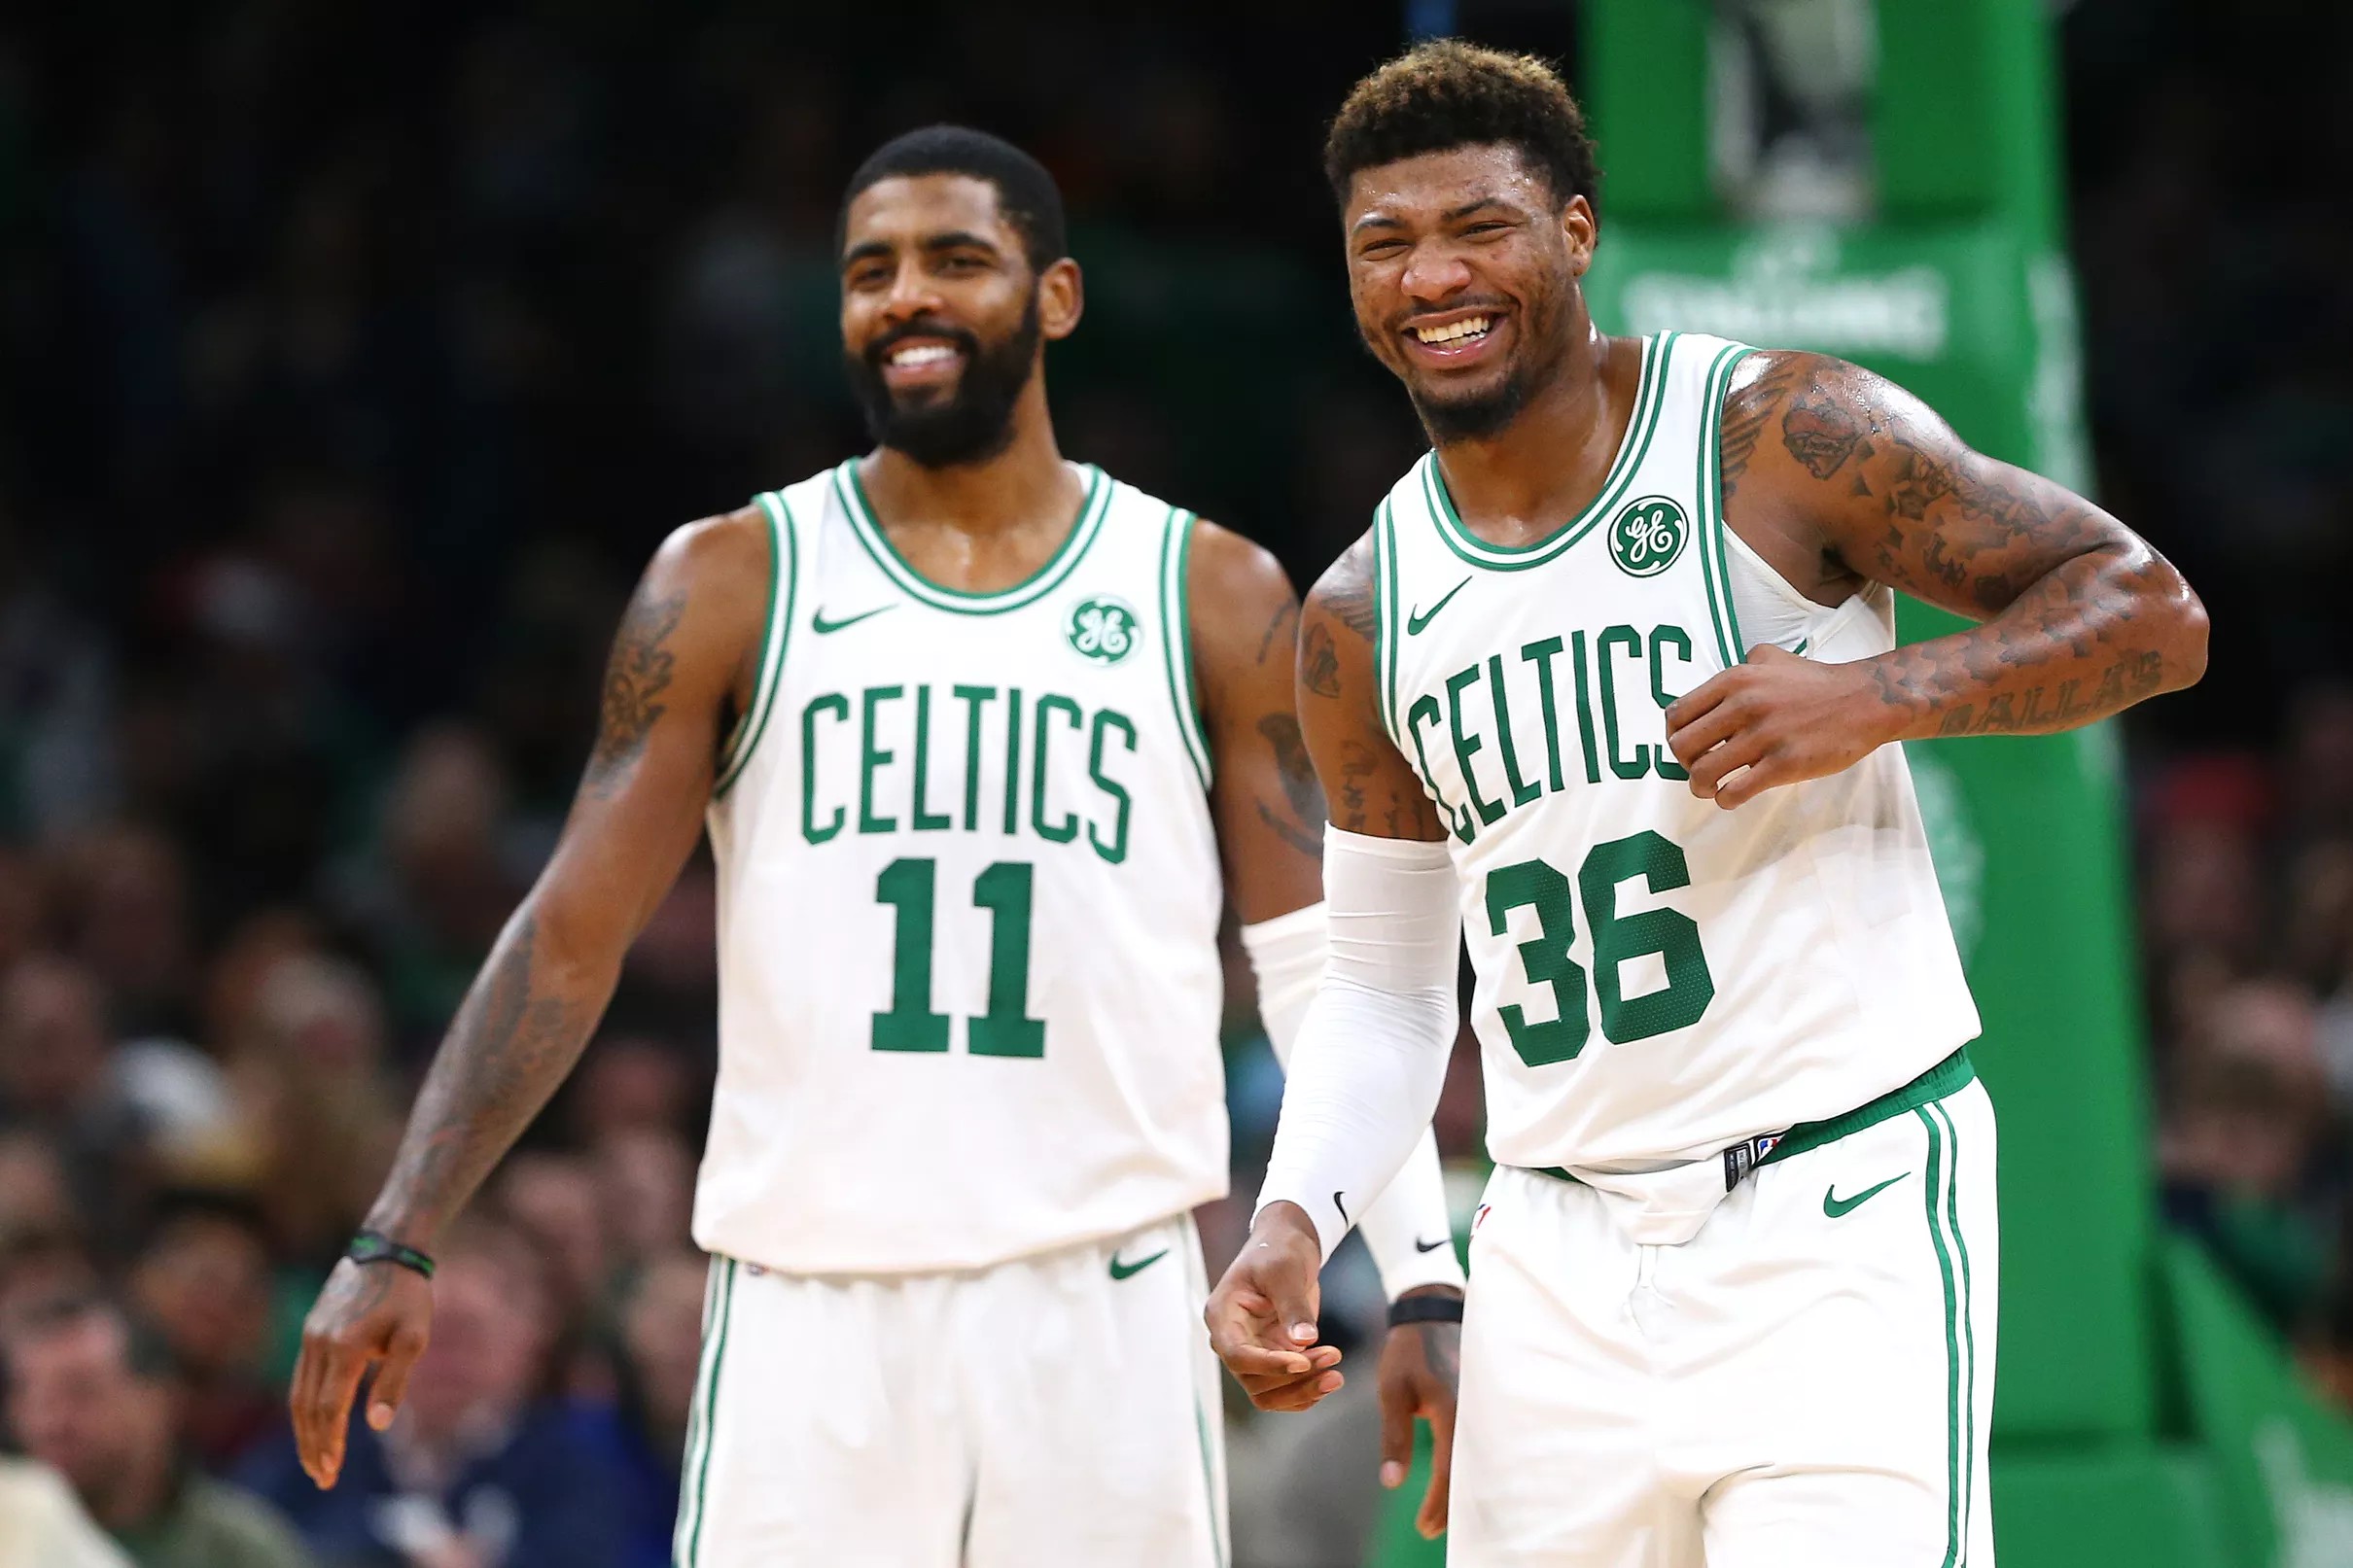 The Celtics may have found the key to success in each other